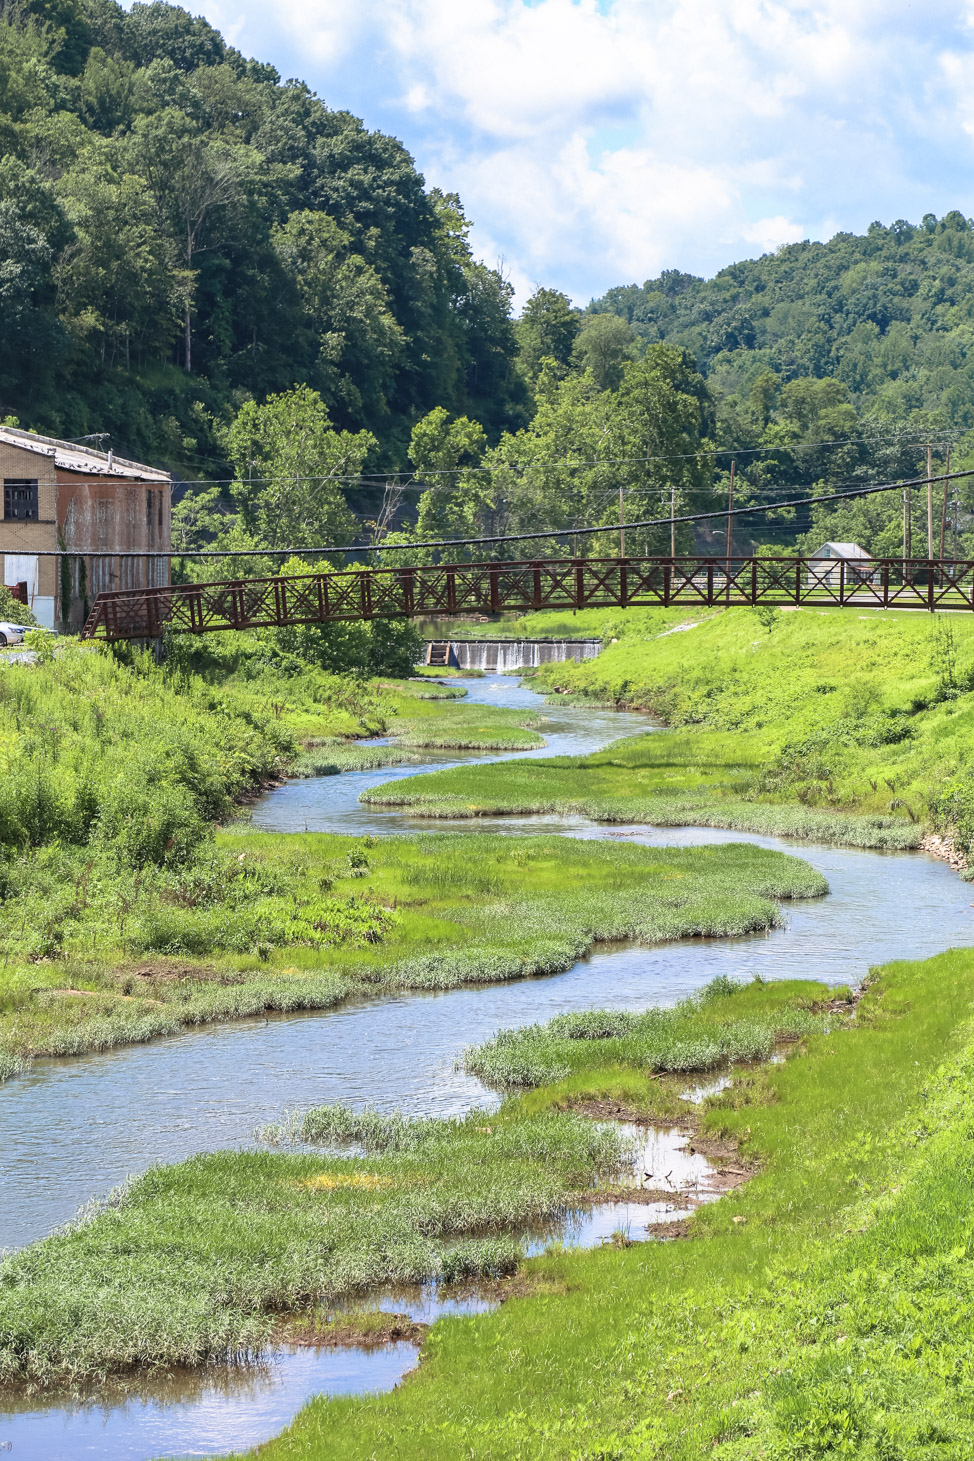 Planning the Ultimate West Virginia Road Trip